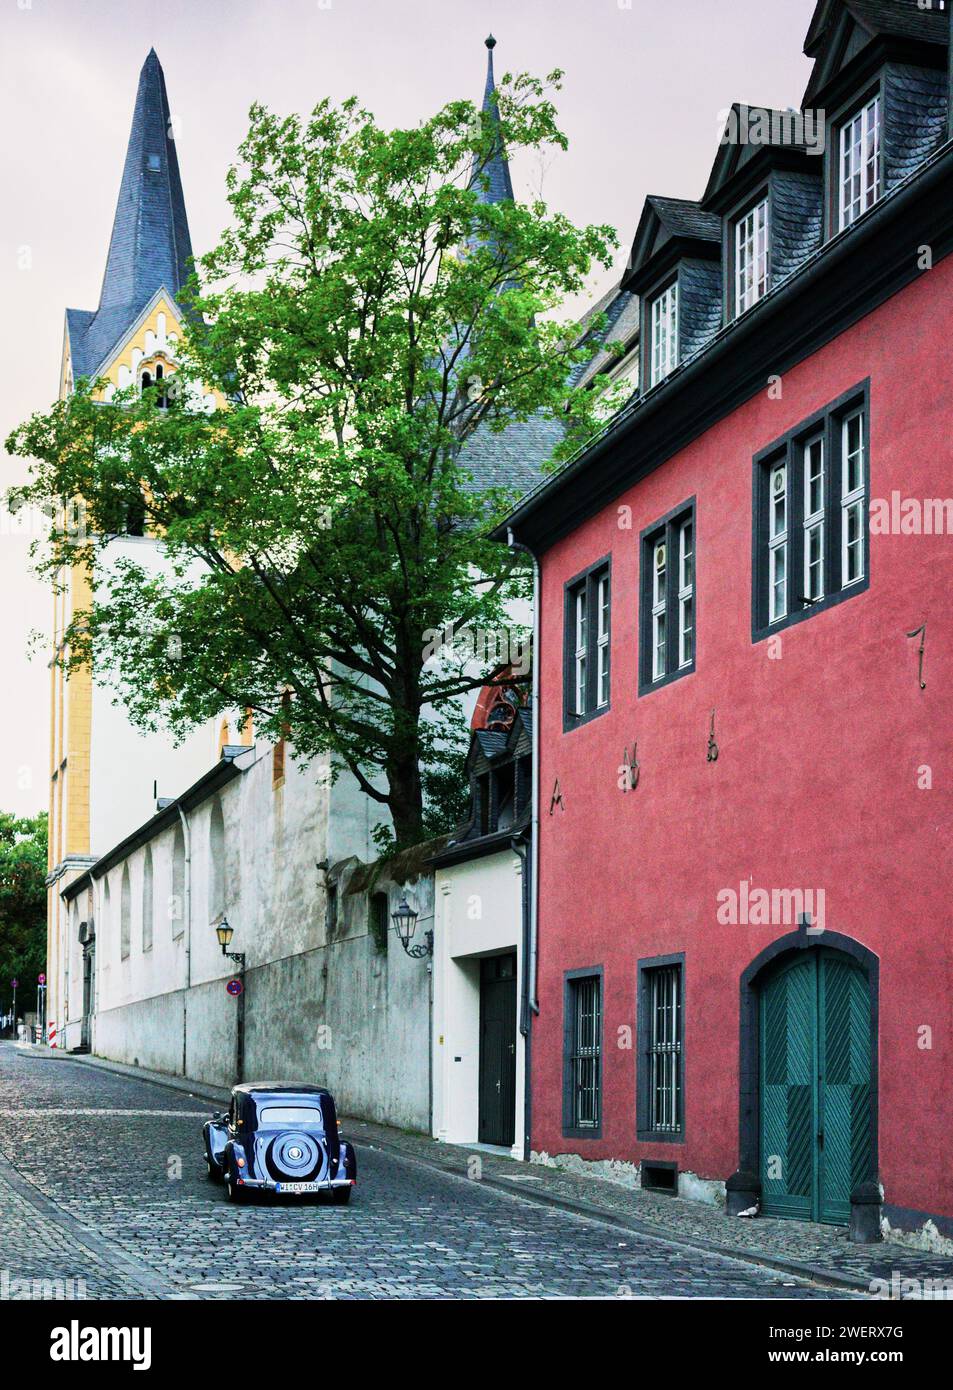 Isolated vintage luxury automobile drives down cobblestone street in the historic town of Koblenz, Germany.  No people.  1940's recreation look. Stock Photo